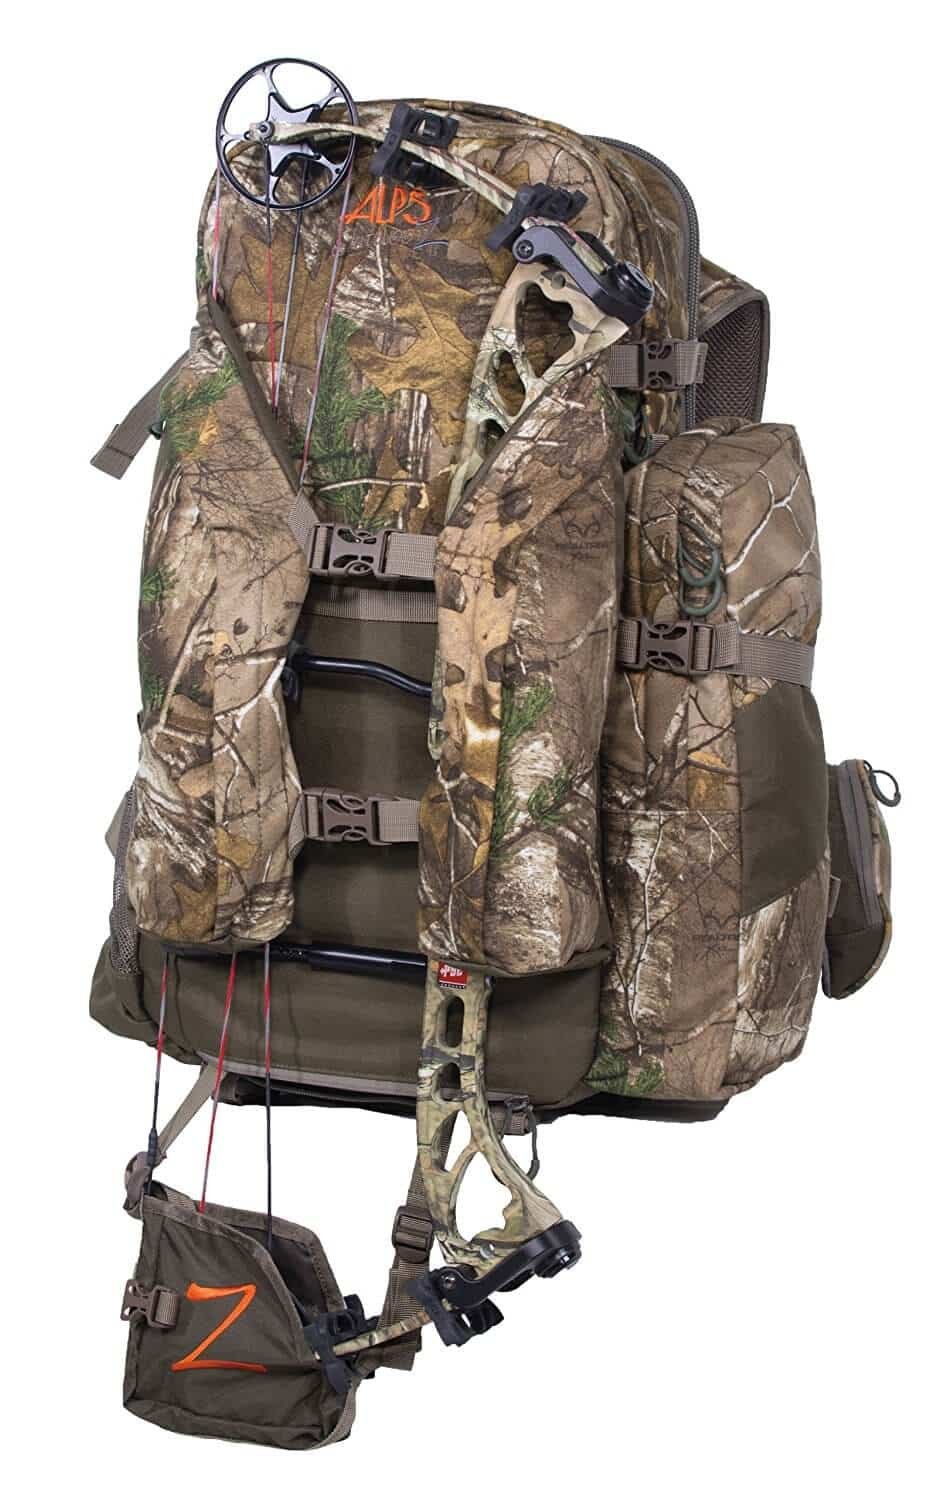 Best Bow Hunting Backpack #6 - ALPS OutdoorZ Traverse EPS - Bow Attachment expanded